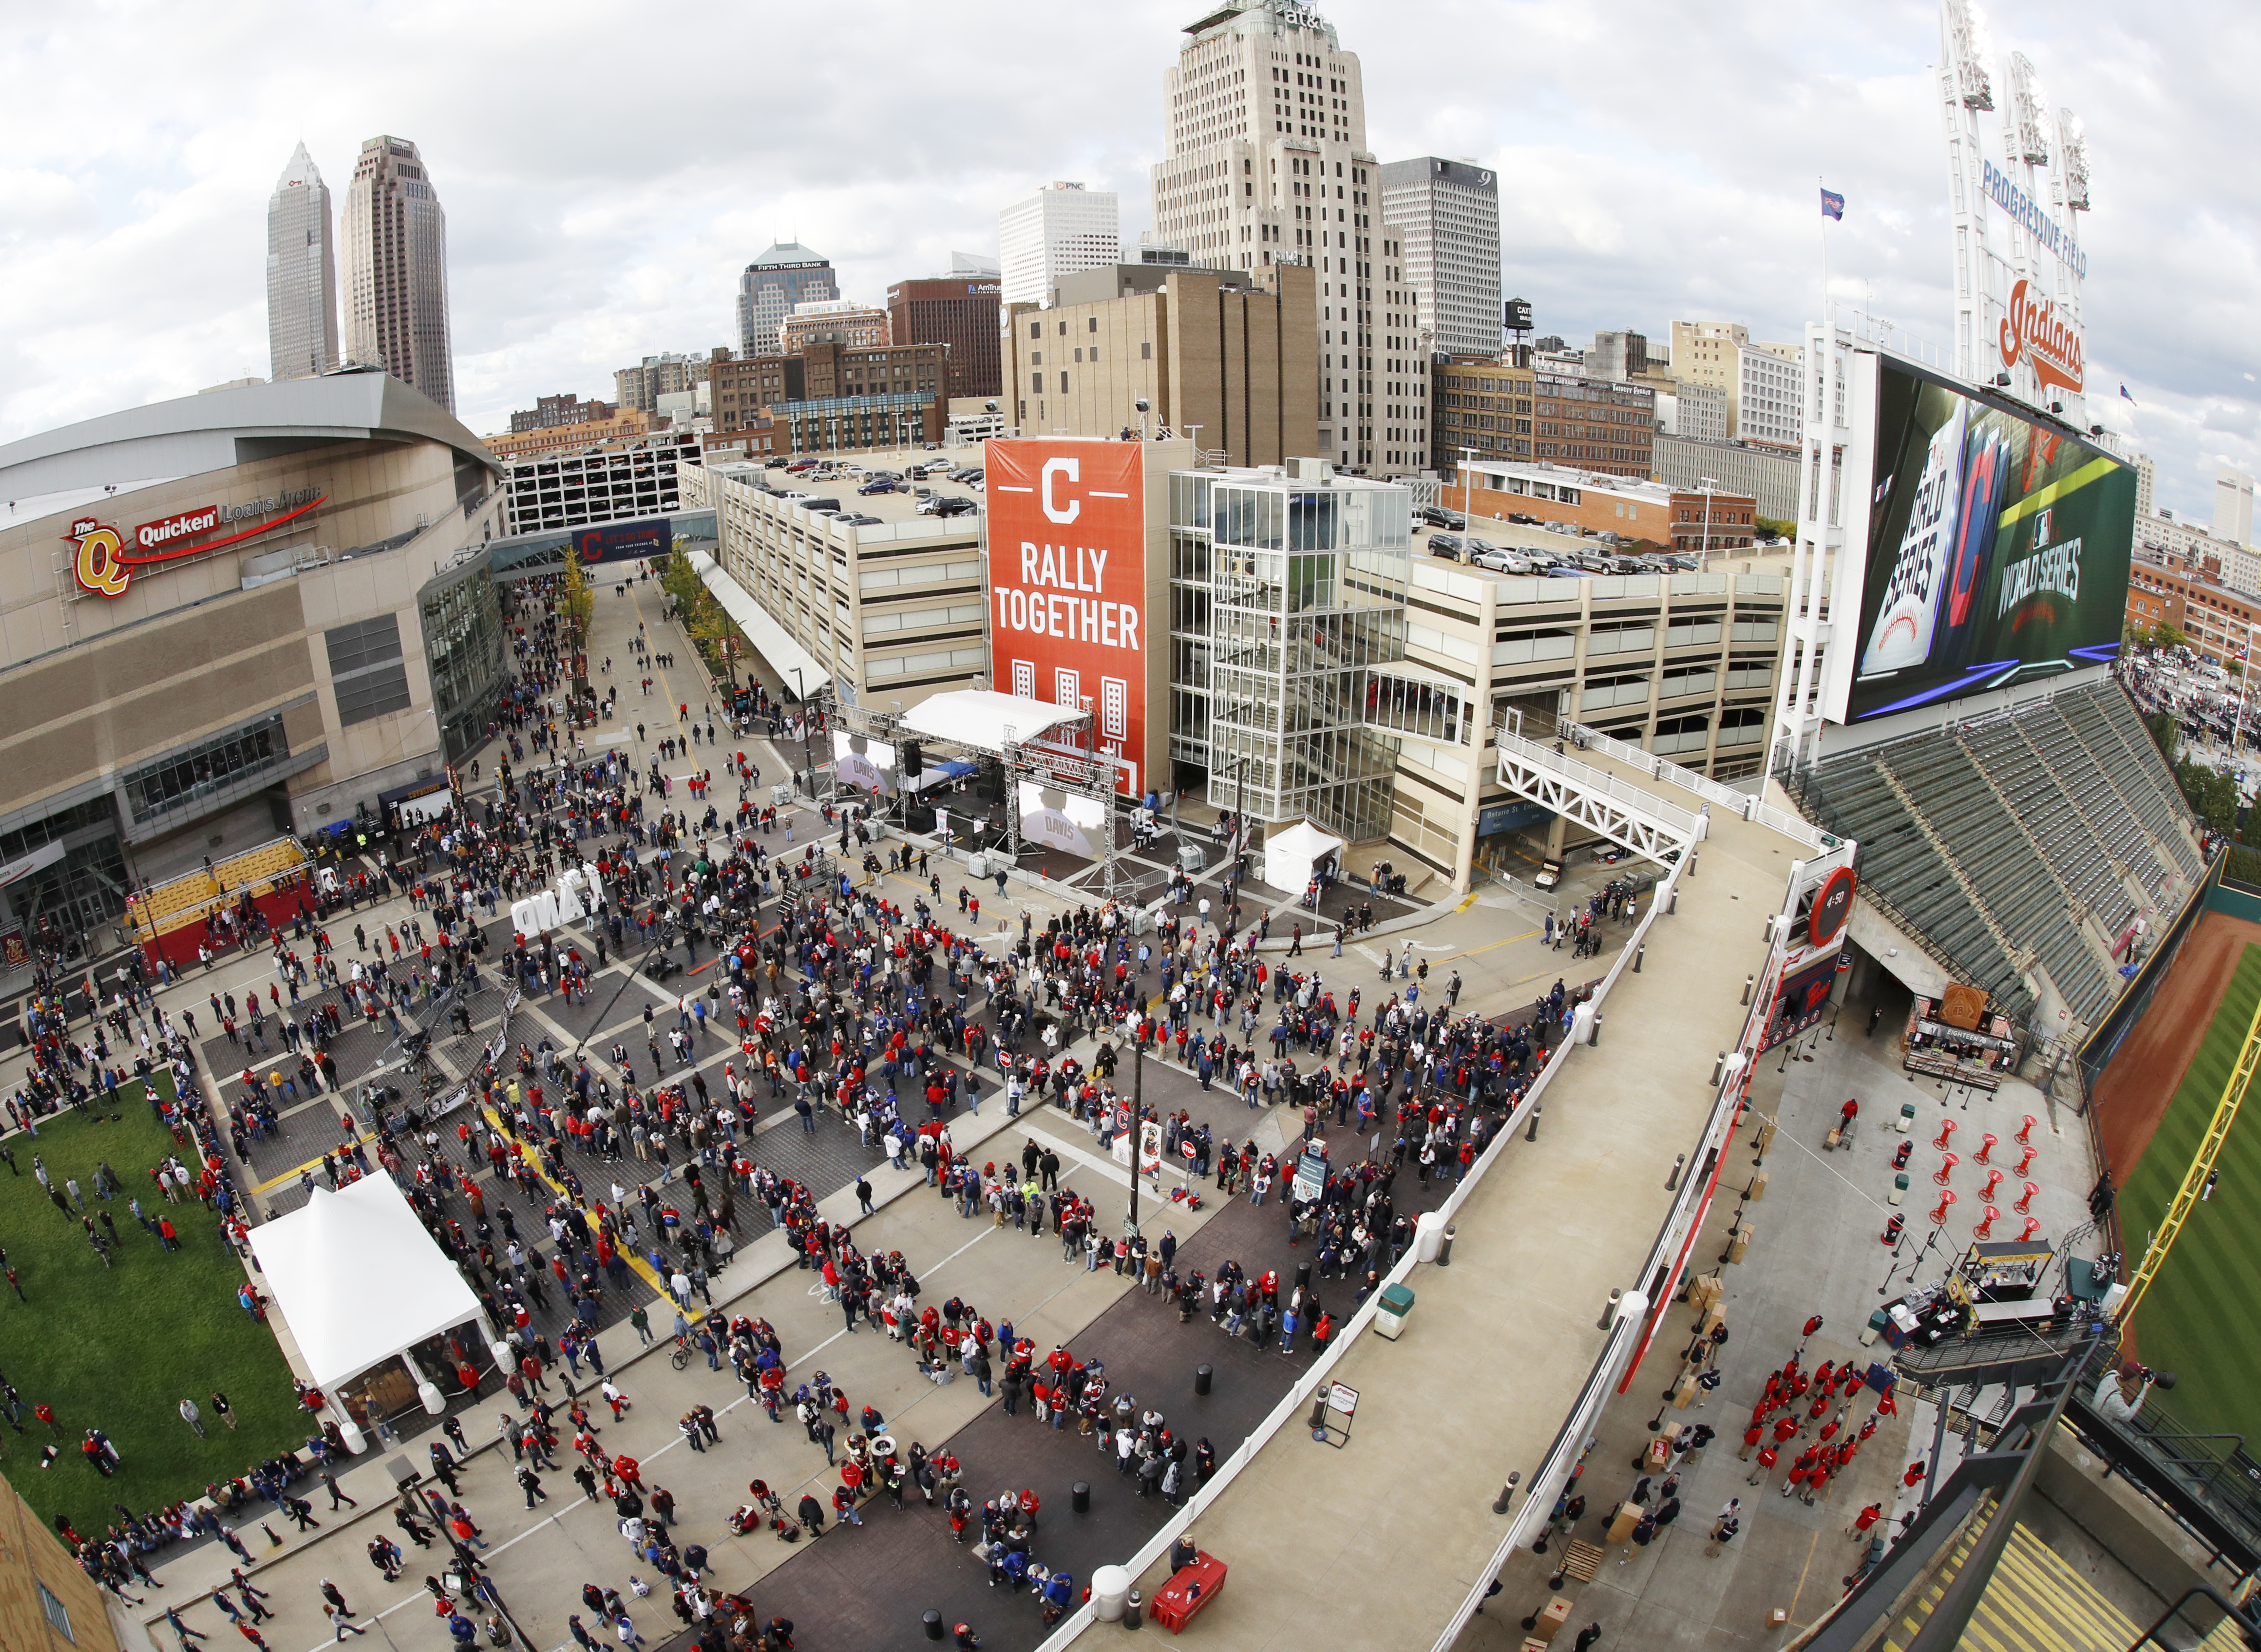 Fans line up for Game 1 of the Major League Baseball World Series at Progressive Field between the Cleveland Indians and the Chicago Cubs and the season opener for the Cleveland Cavaliers at the Quicken Loans Arena on Tuesday, Oct. 25, 2016, in Cleveland. (AP Photo/Gene J. Puskar)